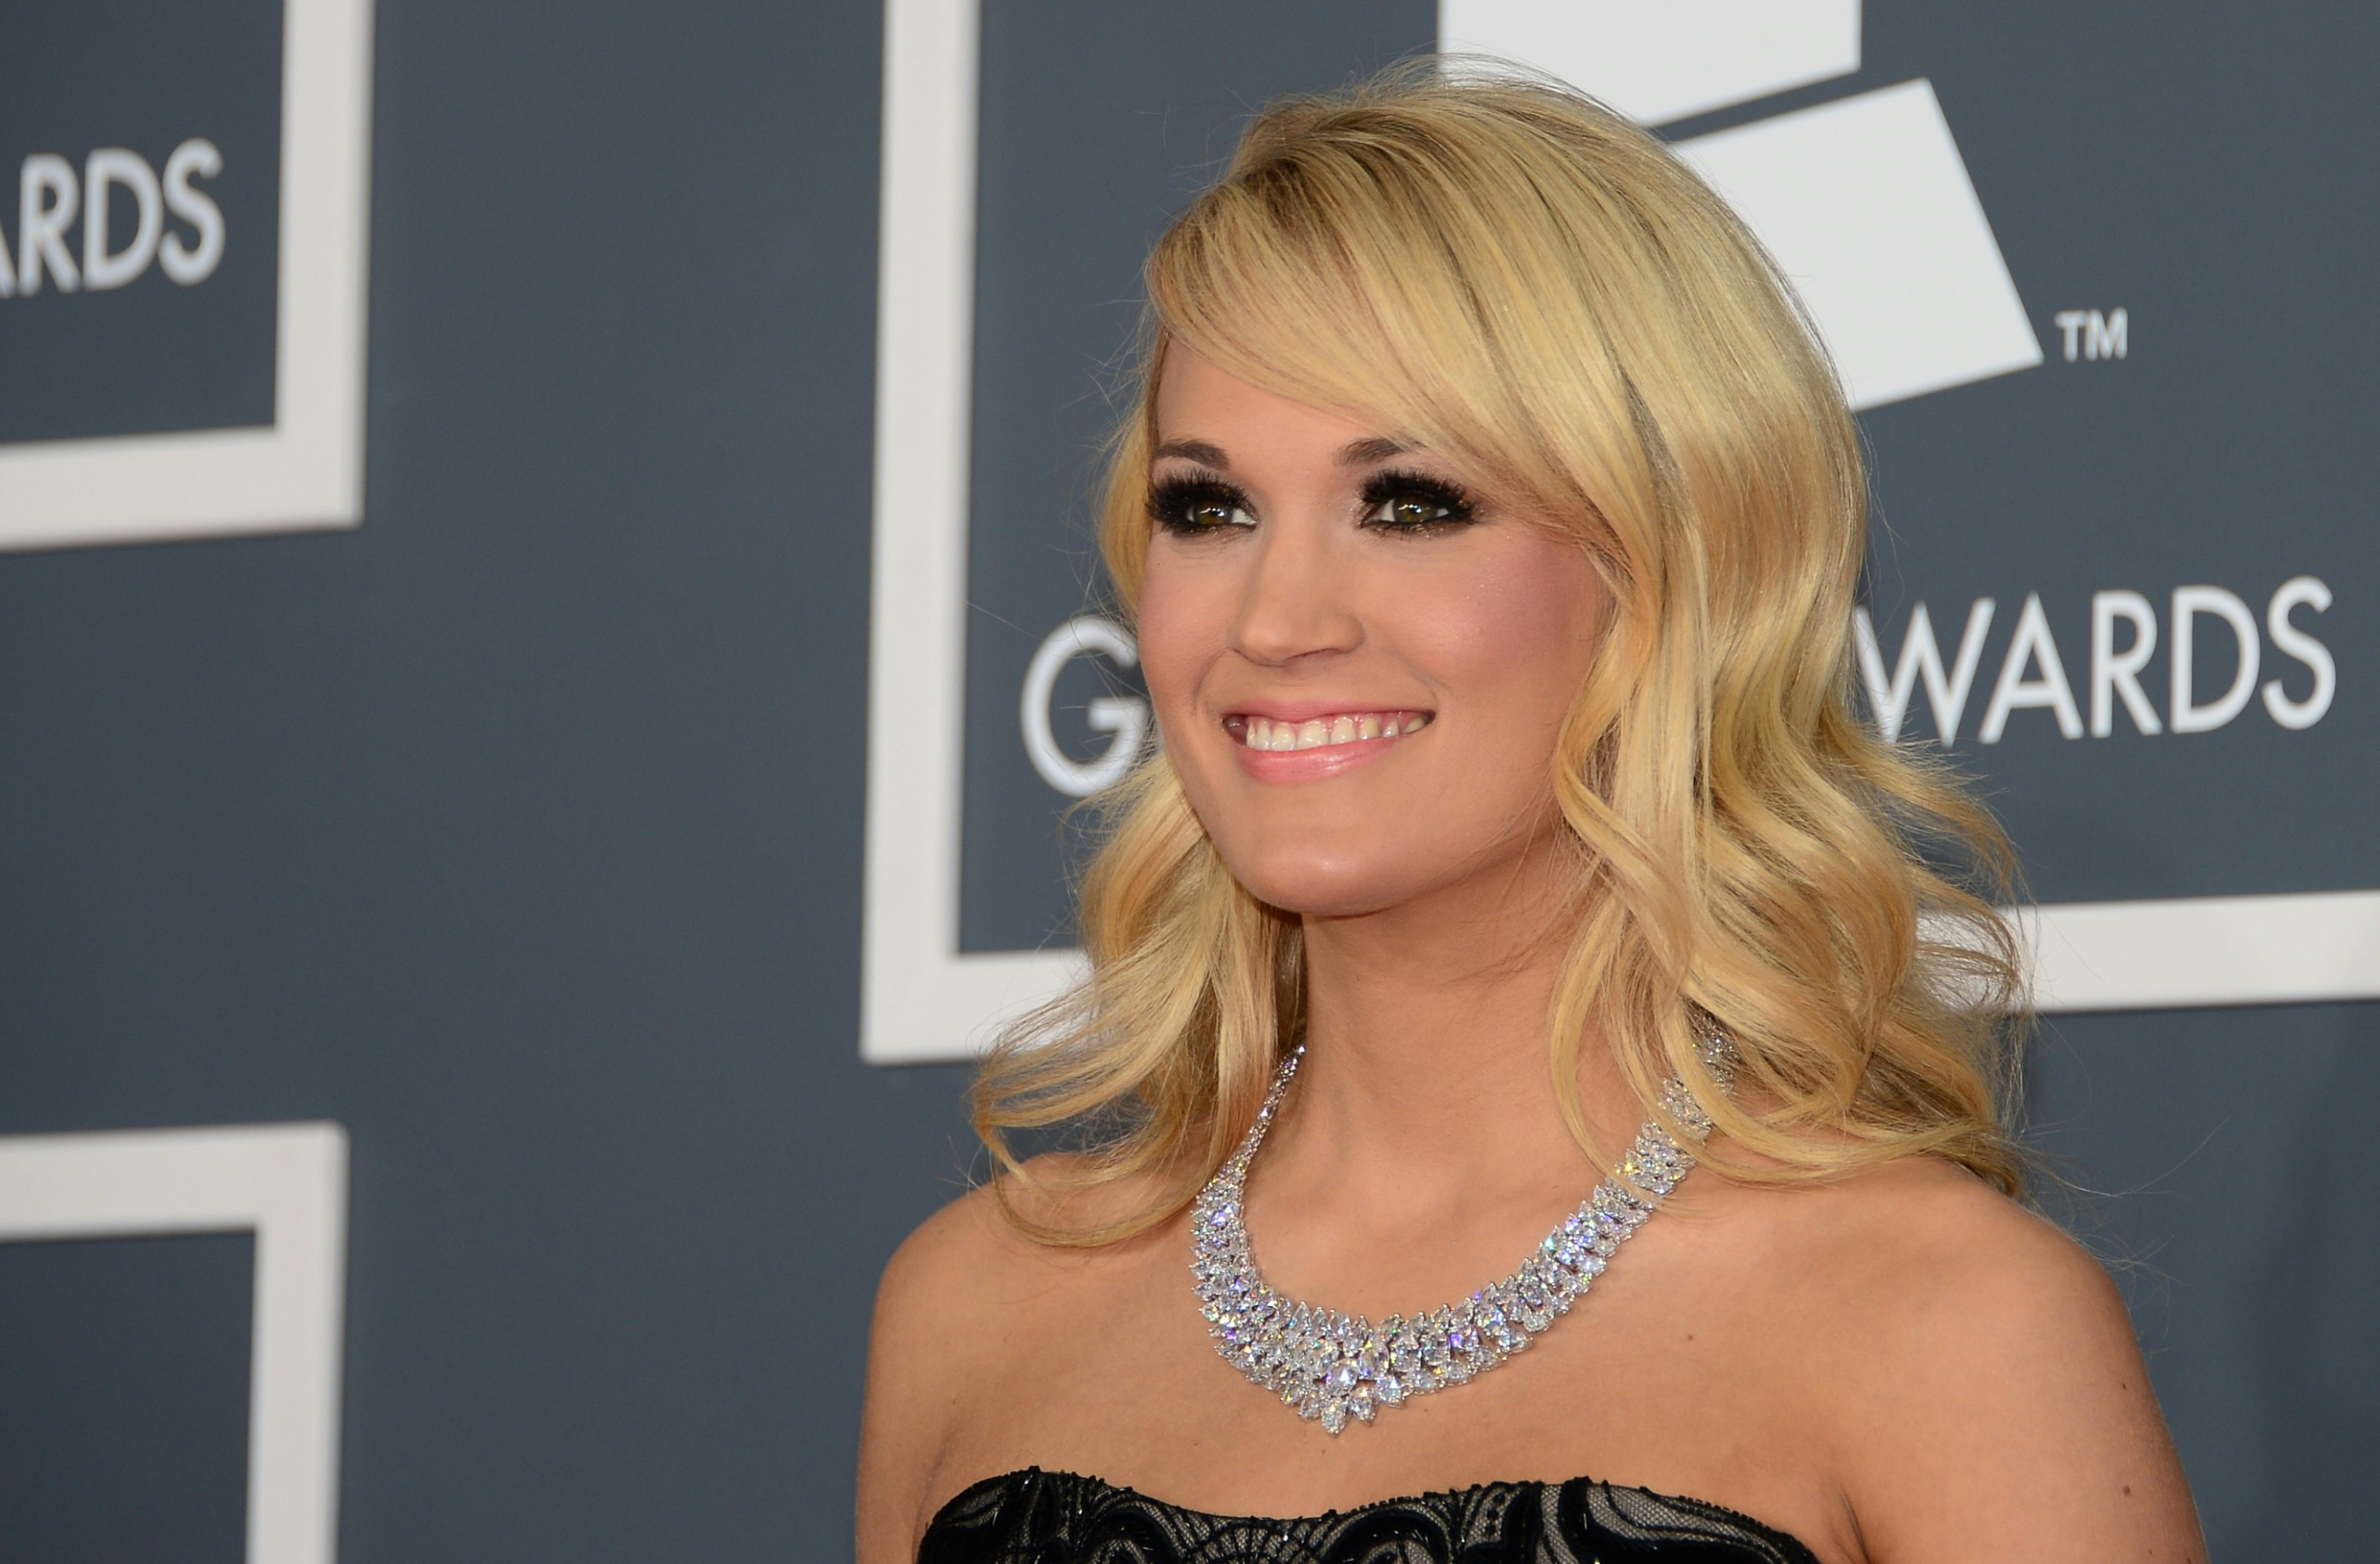 From girl-next-door to glamour! See Carrie Underwood's style